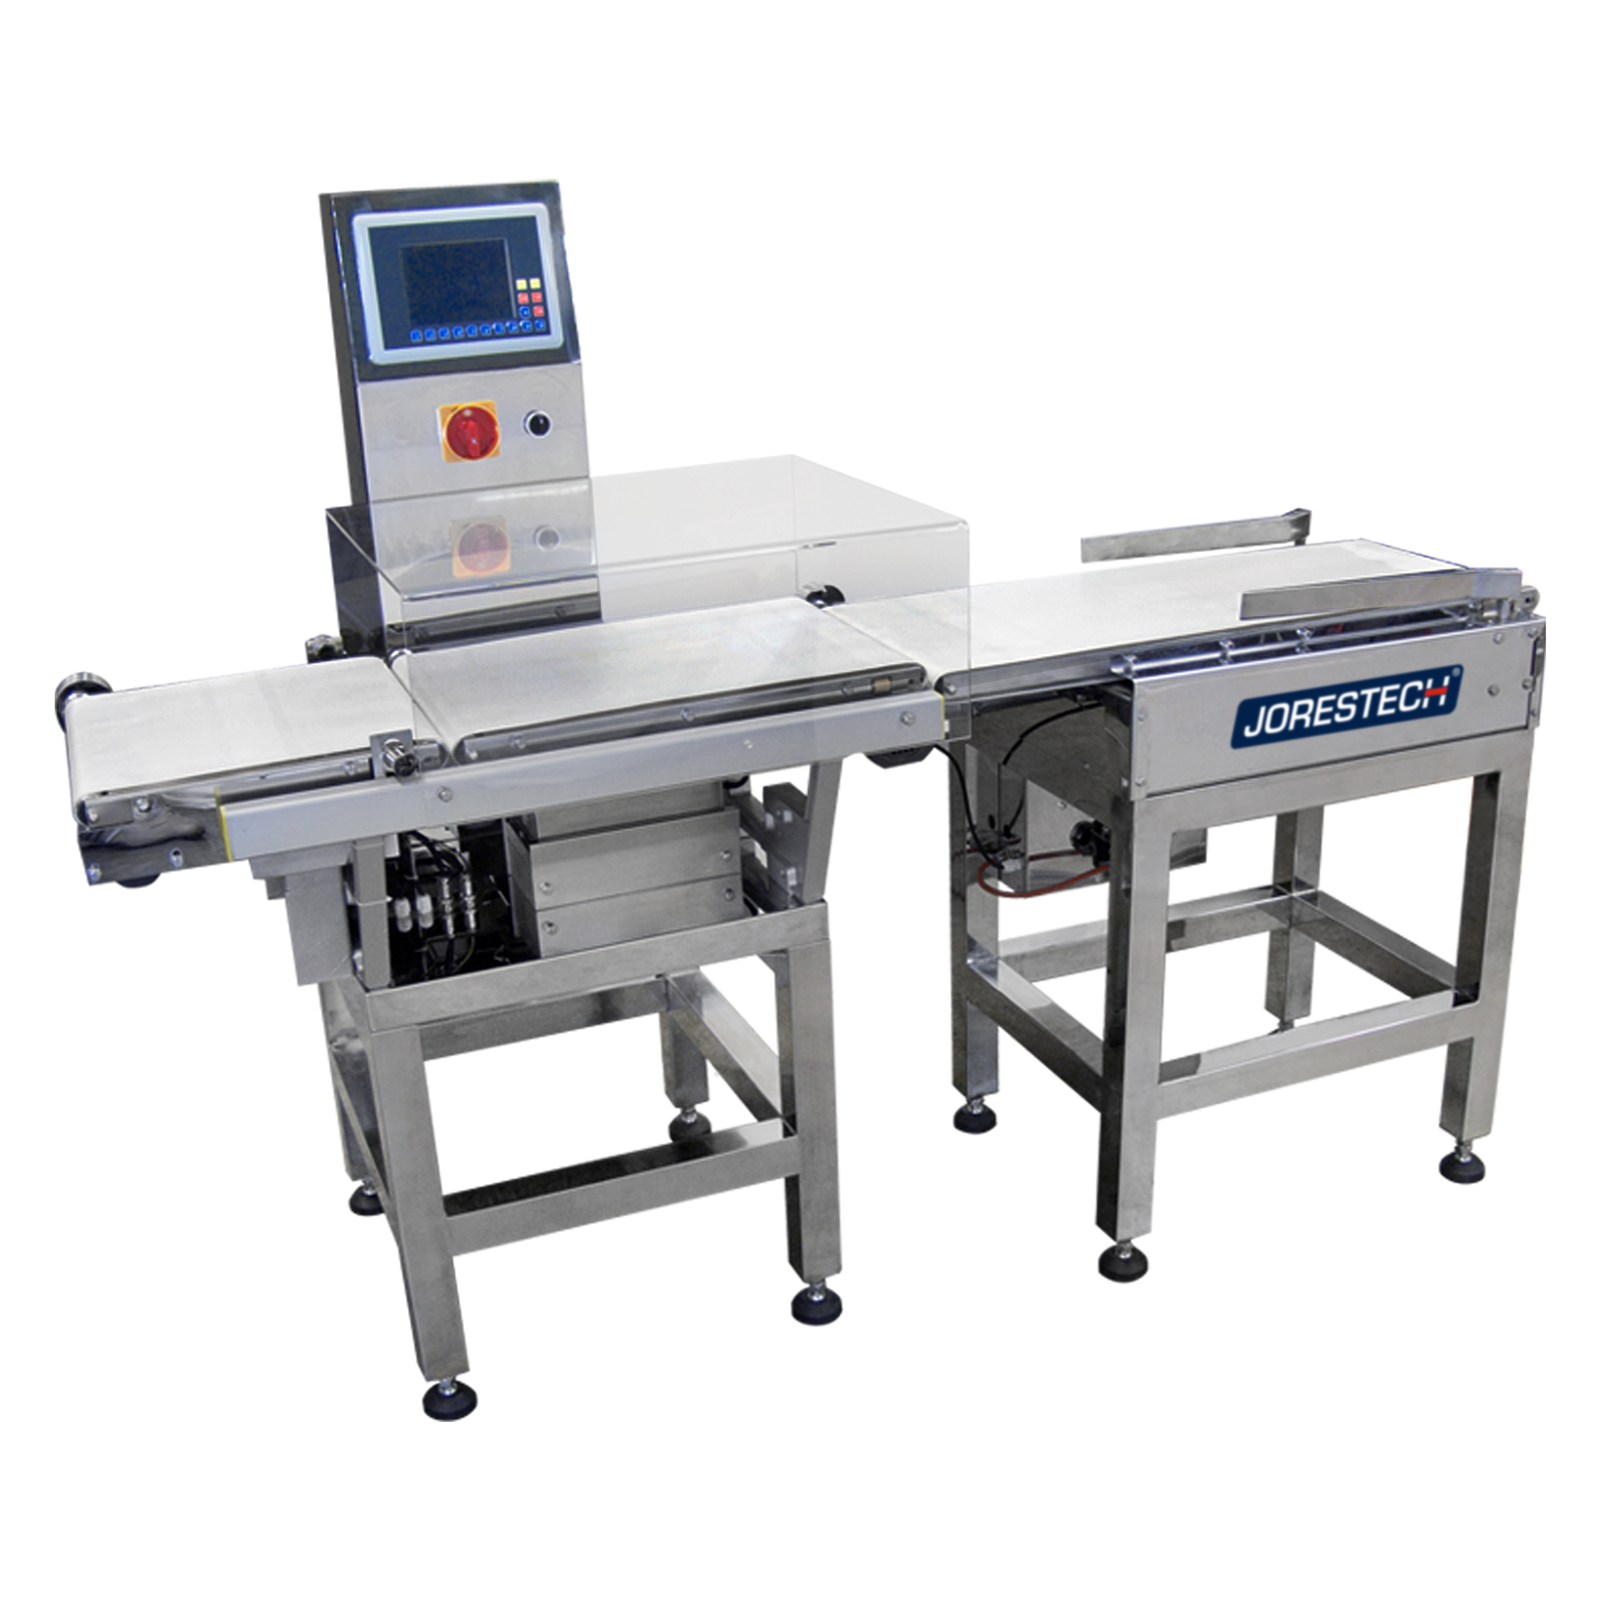 The stainless steel digital check weigher with white conveyor and blue Jorestech logo